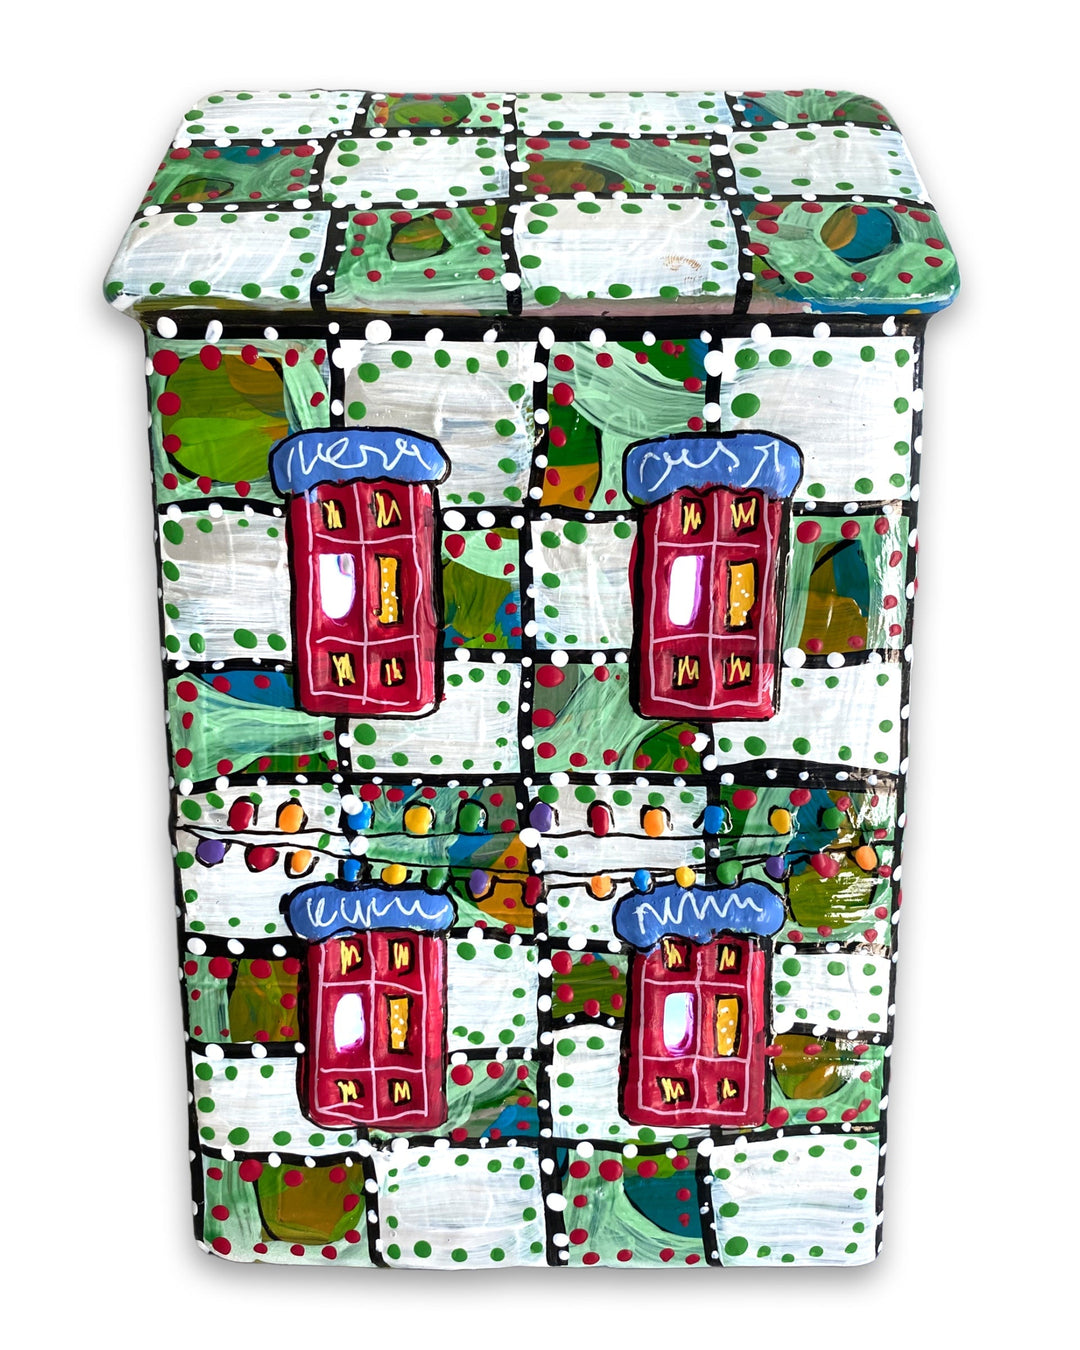 The Gallery Green & White Edition Hand Painted Ceramic LED Christmas Village House - Heather Freitas 